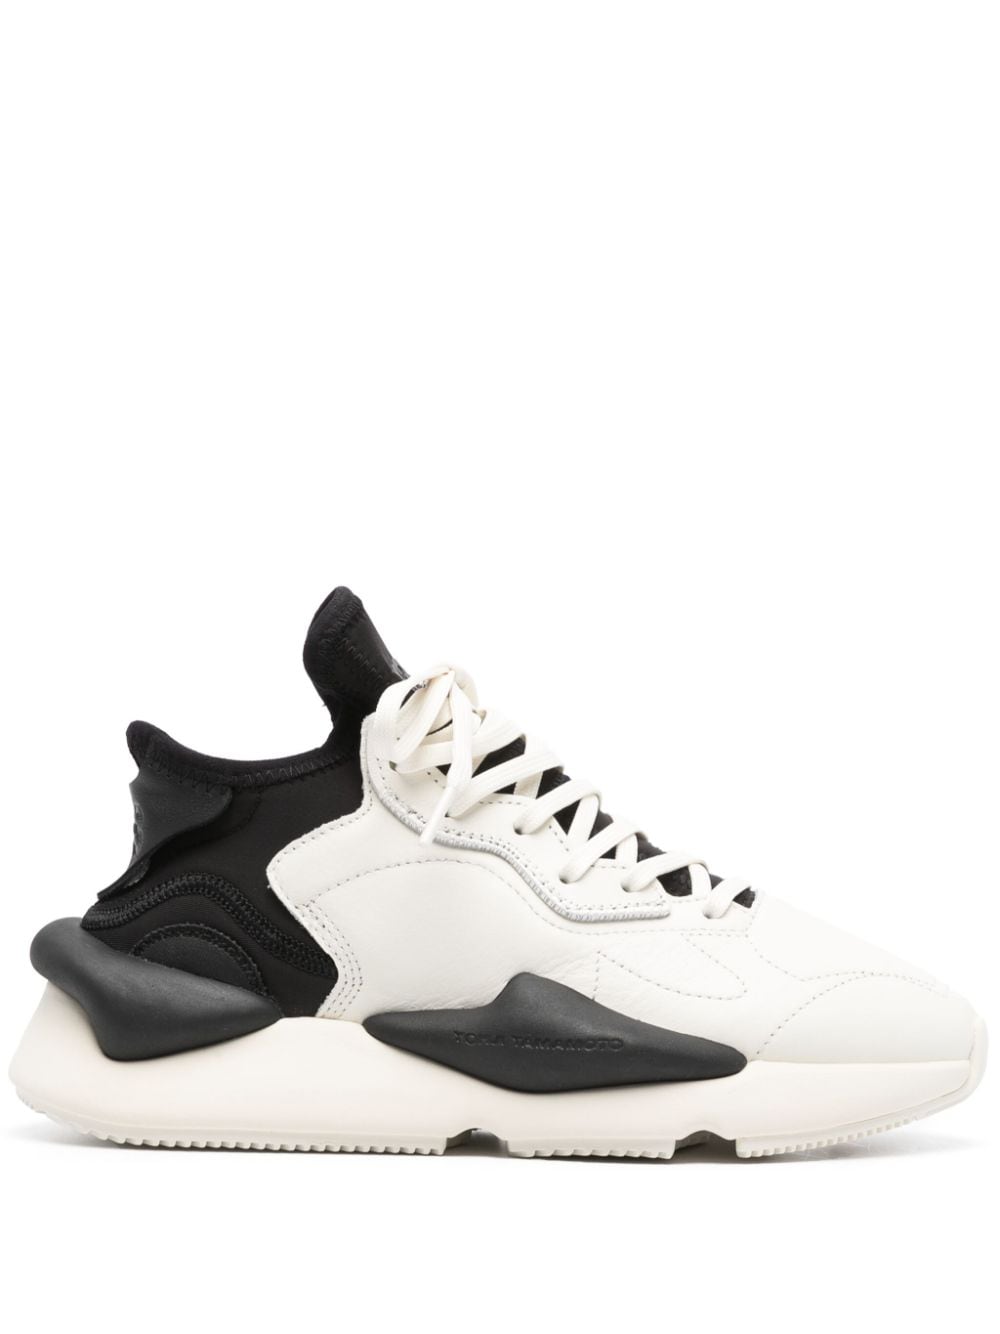 Y-3 Kaiwa Panelled Leather Sneakers - Farfetch